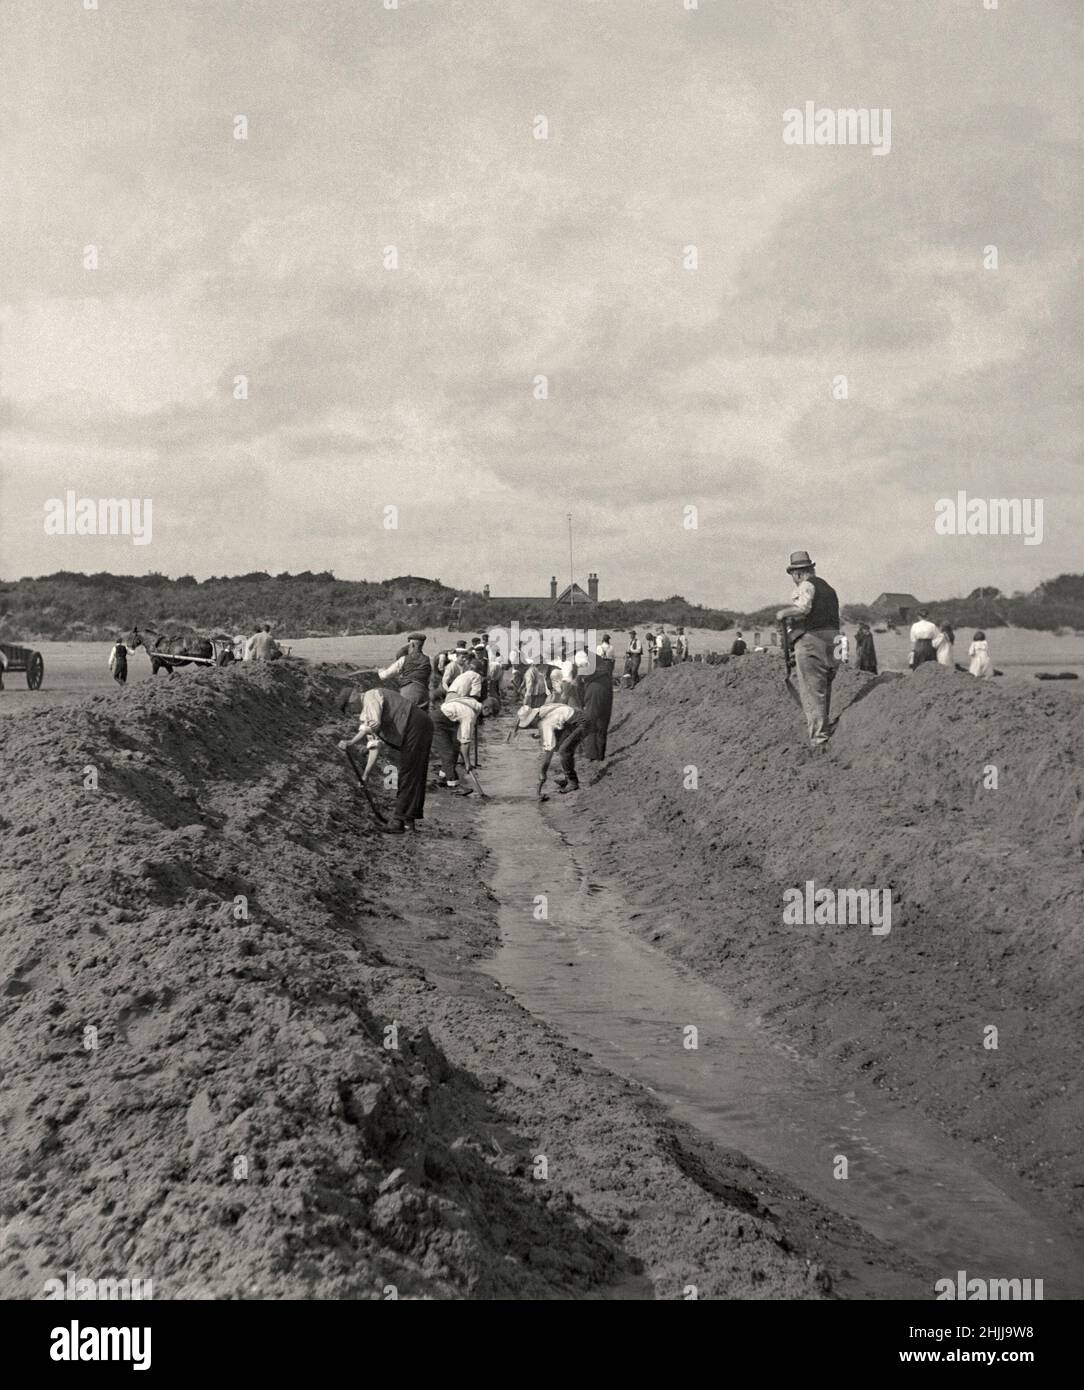 Digging or enlarging a drainage channel in the sand on a beach in Victorian Britain c. 1900. Sand is piled up on either side of the channel. A large team is digging by hand using spades and shovels. Horses and carts (left) are removing some of the spoil. The water seems to be flowing freely down the improved route. This is taken from an old black and white negative. It will look soft if used at too large a size – a vintage early sepia photograph. Stock Photo